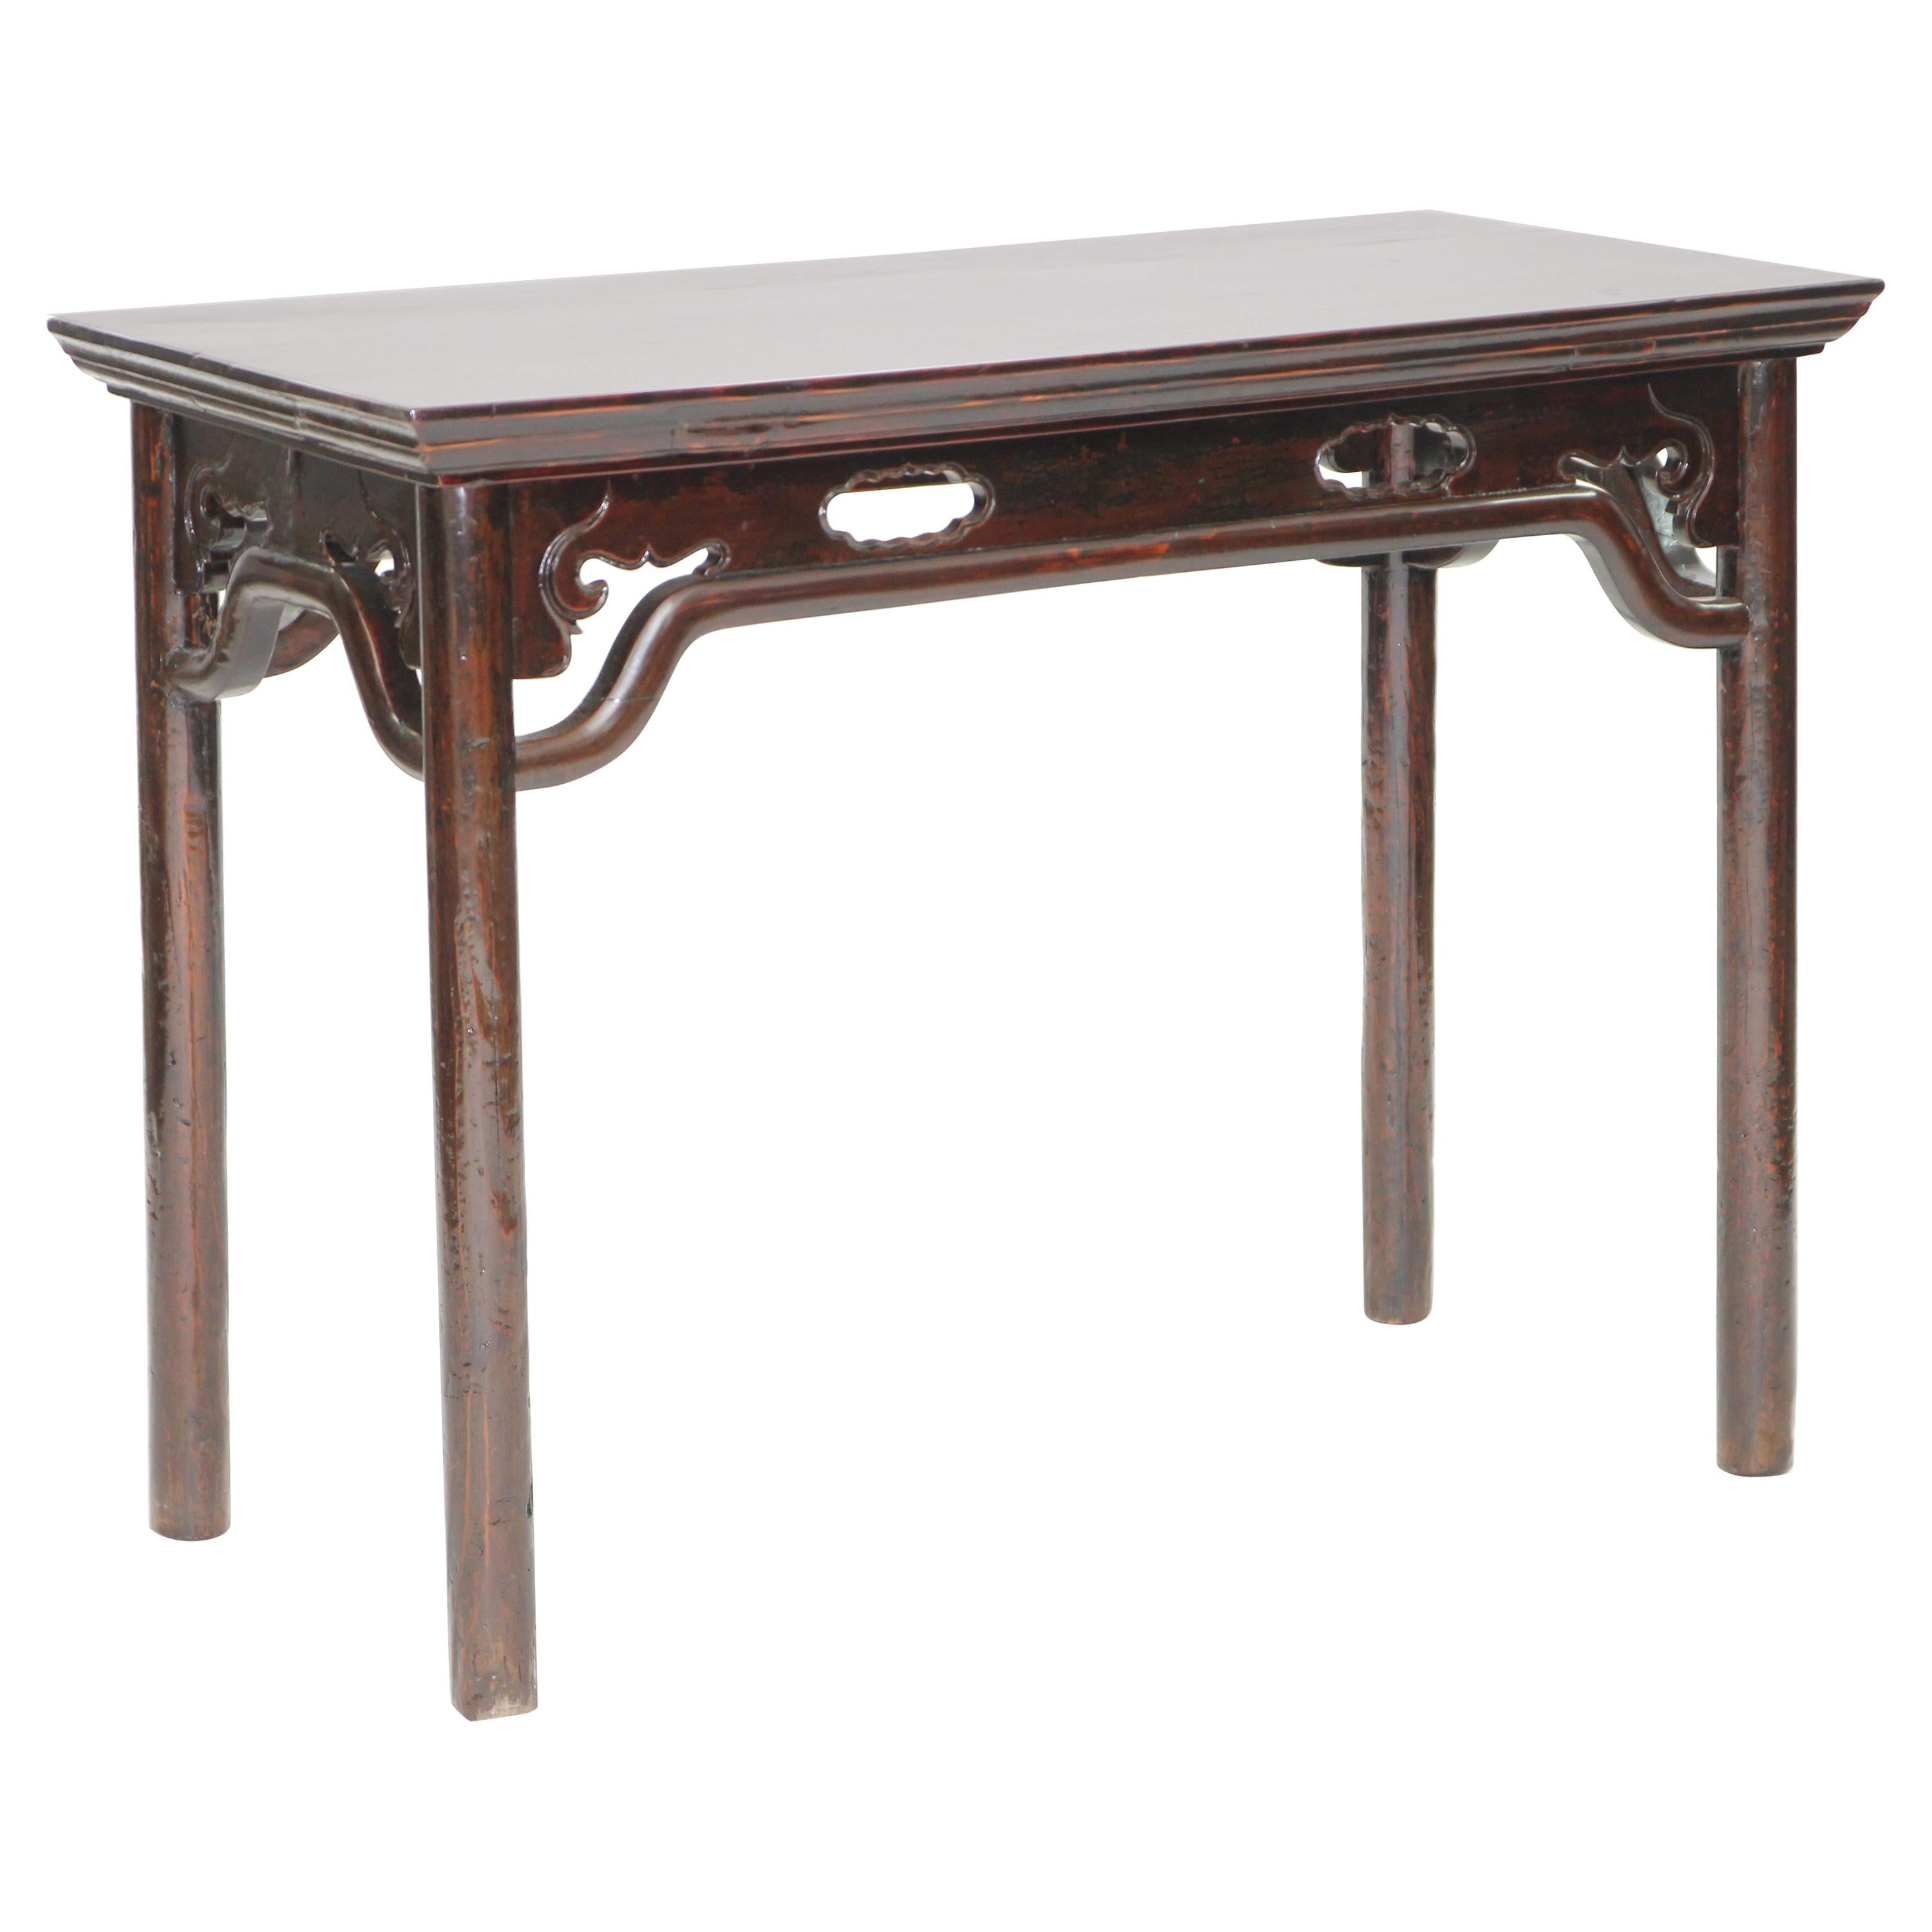 Antique Chinese Table with Open-carved Aprons and Attached Humpback Stretchers